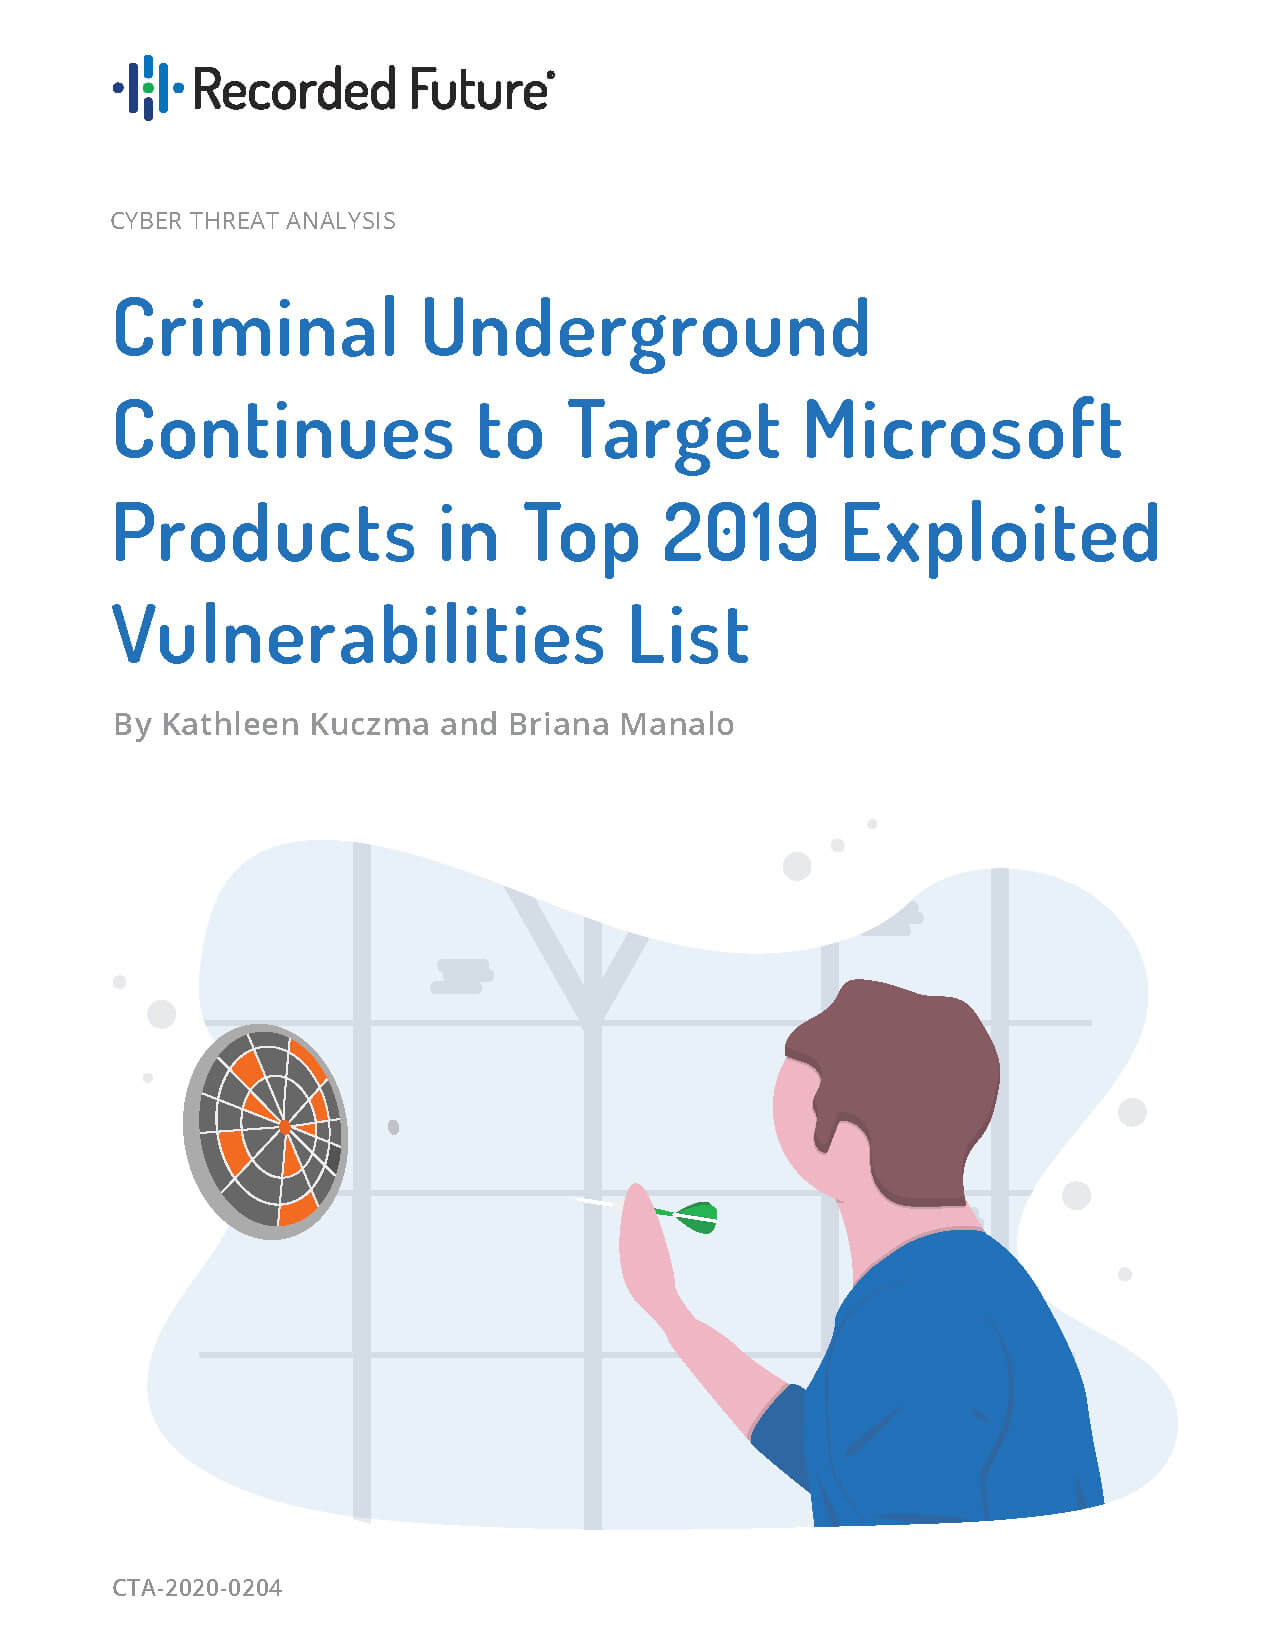 Criminal Underground Continues to Target Microsoft Products in Top 2019 Exploited Vulnerabilities List